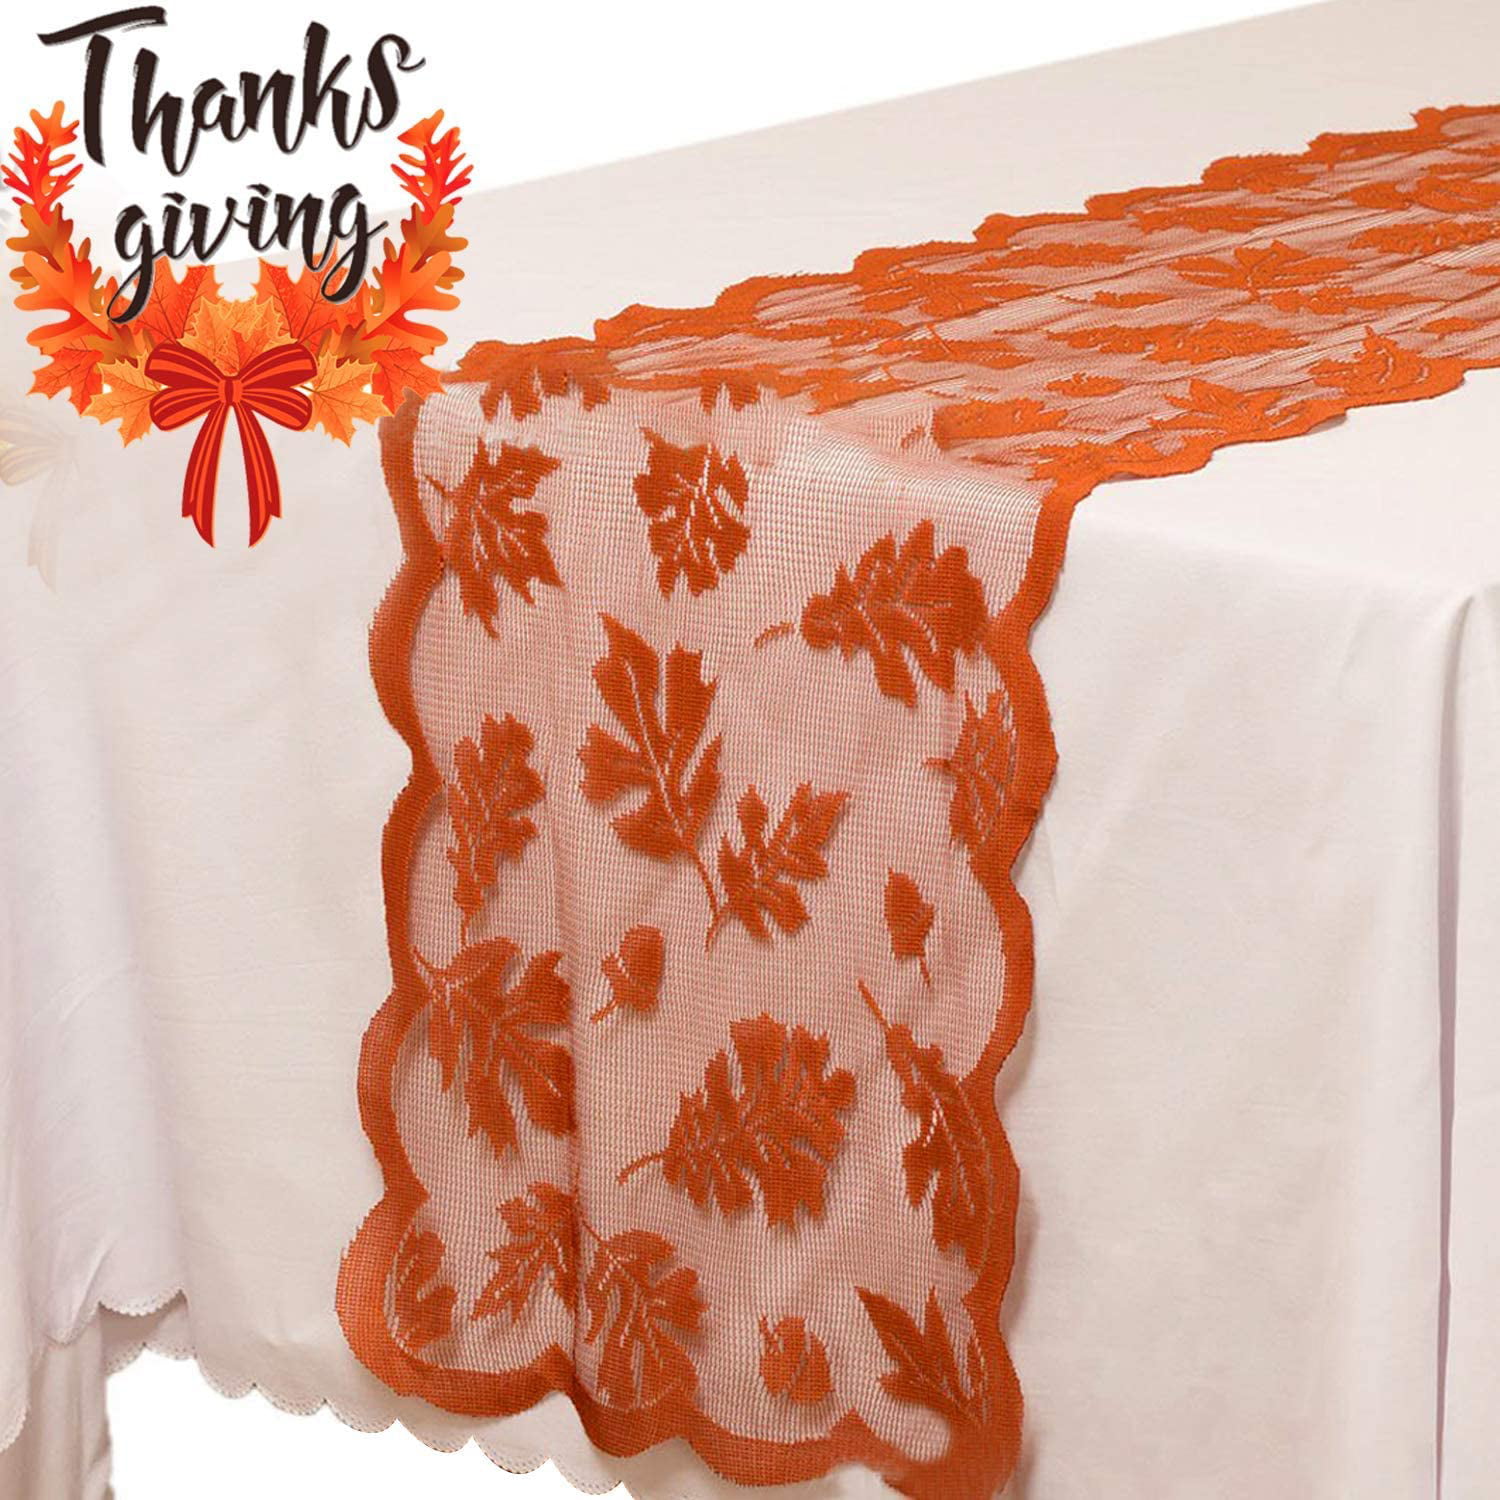 Brown Fall Table Runner Thanksgiving Decorations 13 x 72 Inch Maple Leaves Table Runner Harvest Lace Pumpkin Runner Brow Long Fall Table Line for Thanksgiving Dinner 